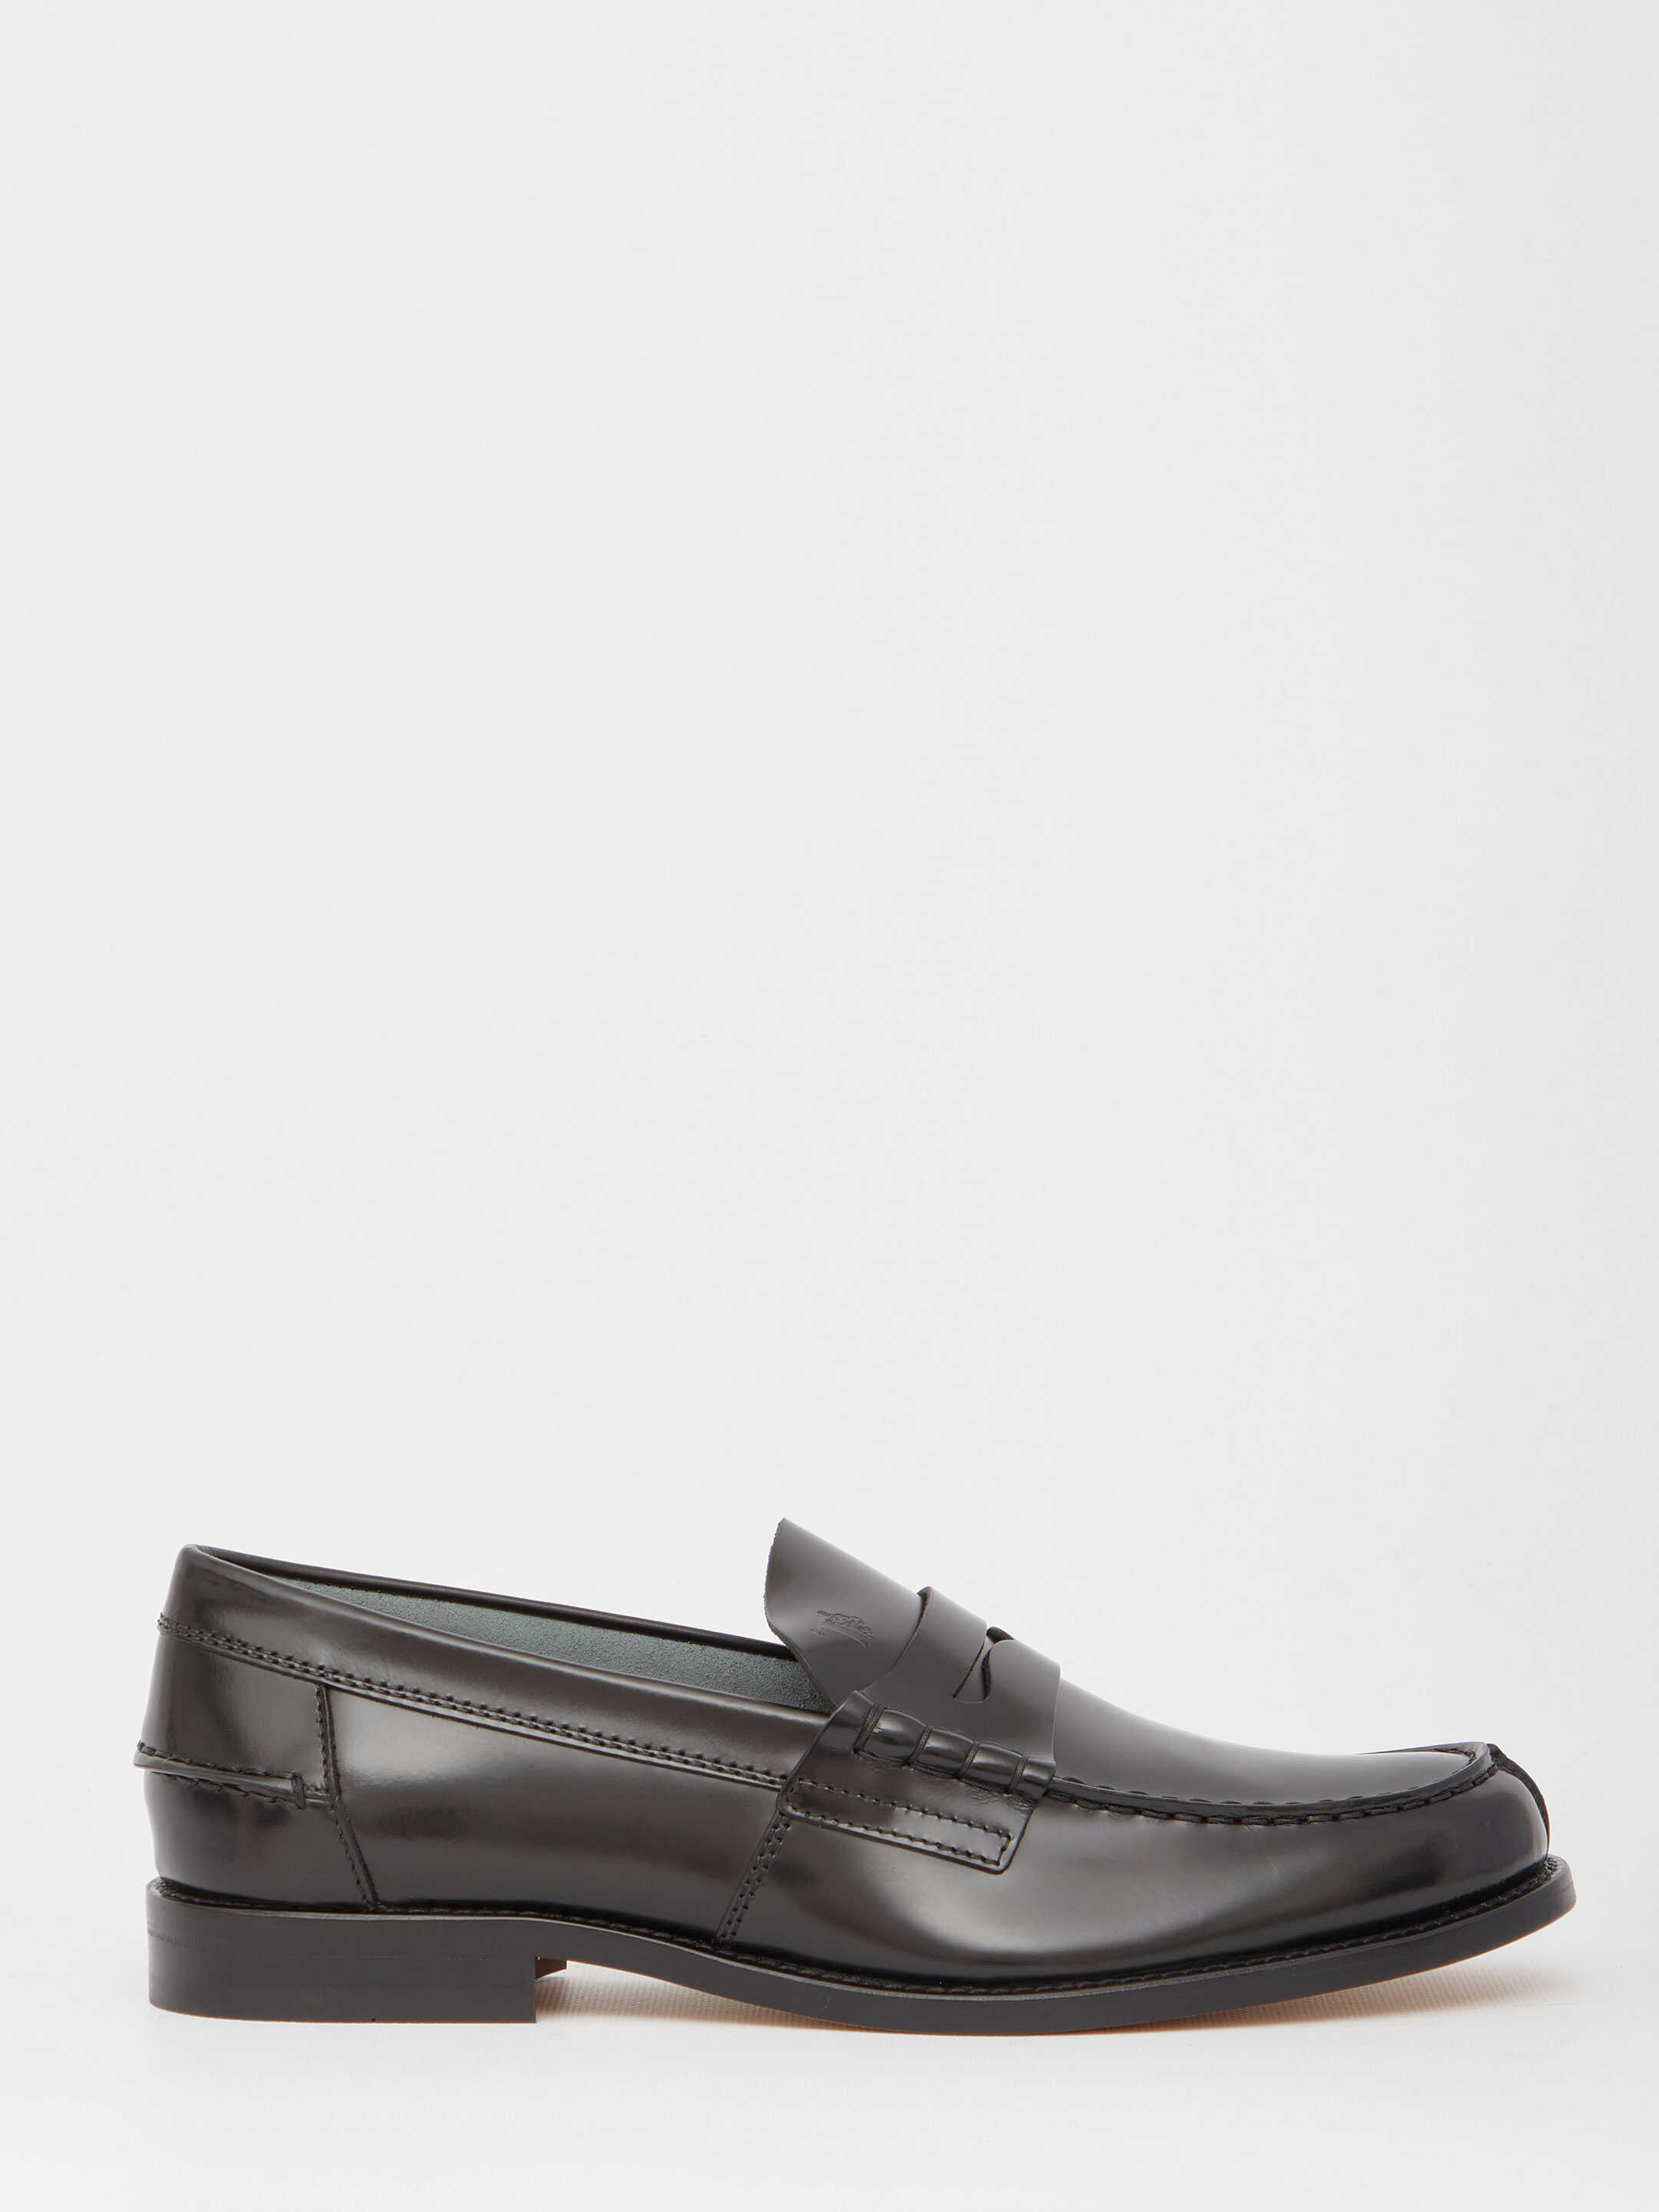 TOD'S Leather Loafers Black image5